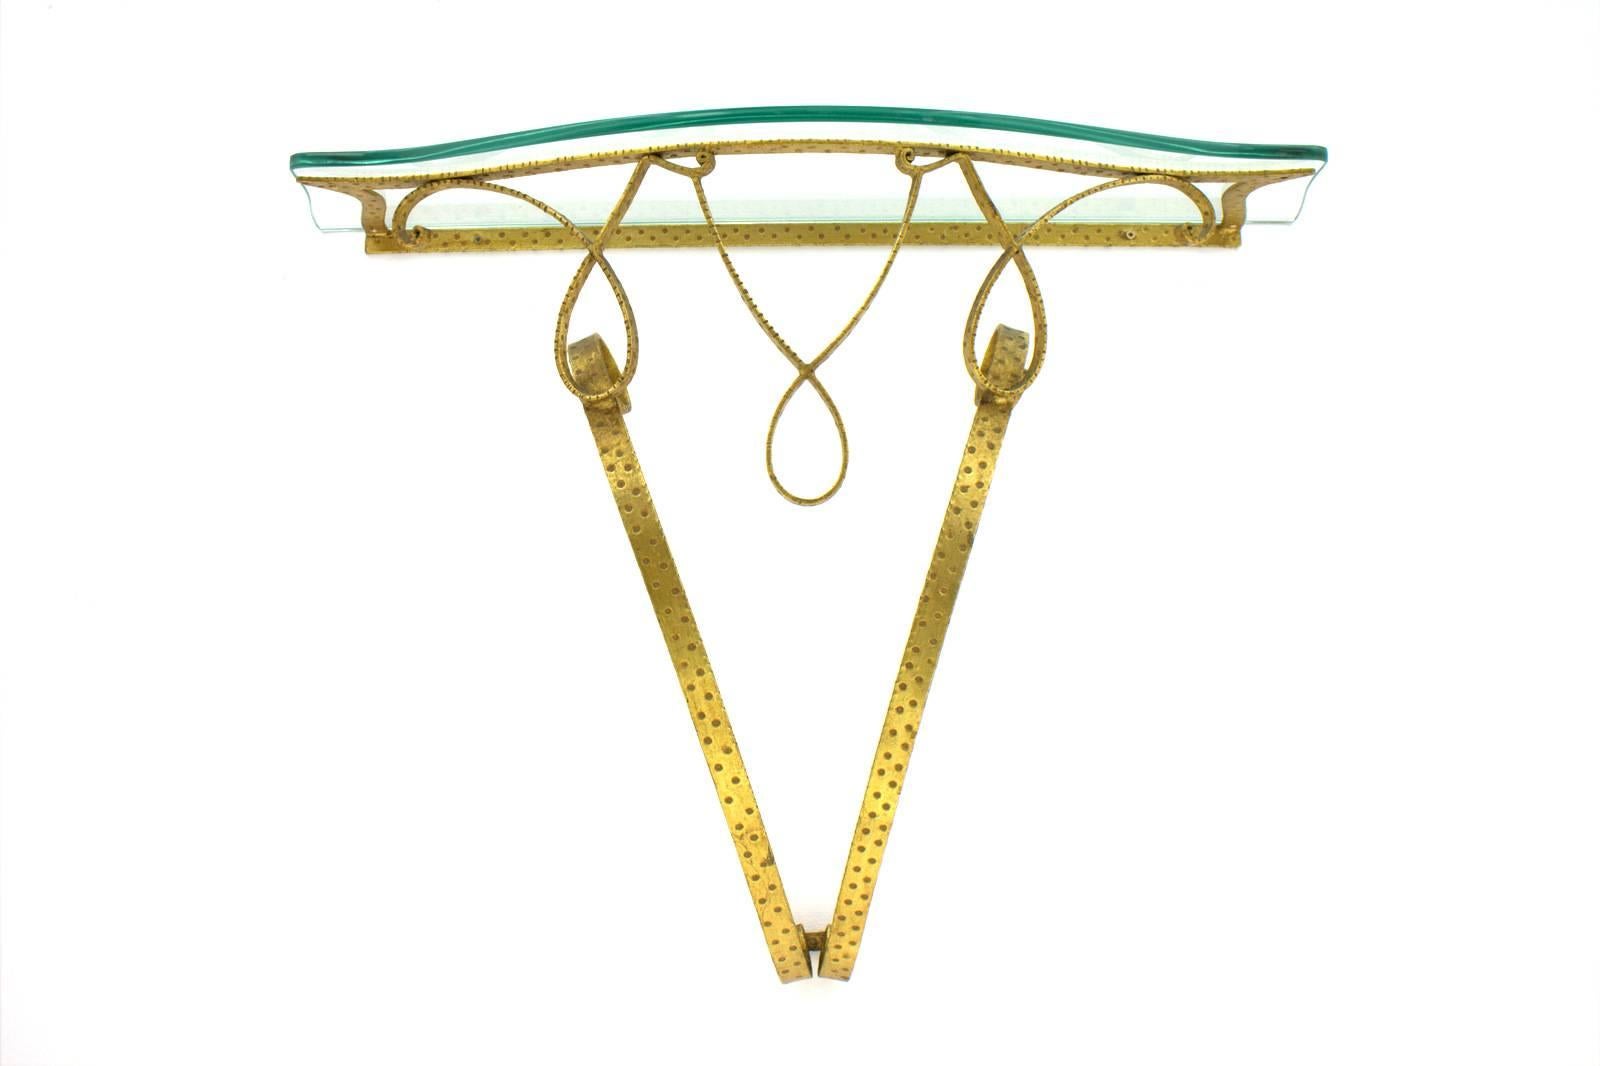 Wall Console table by Pier Luigi Colli, brass and glass, Italy, 1950s.
Very good condition.

Worldwide shipping.